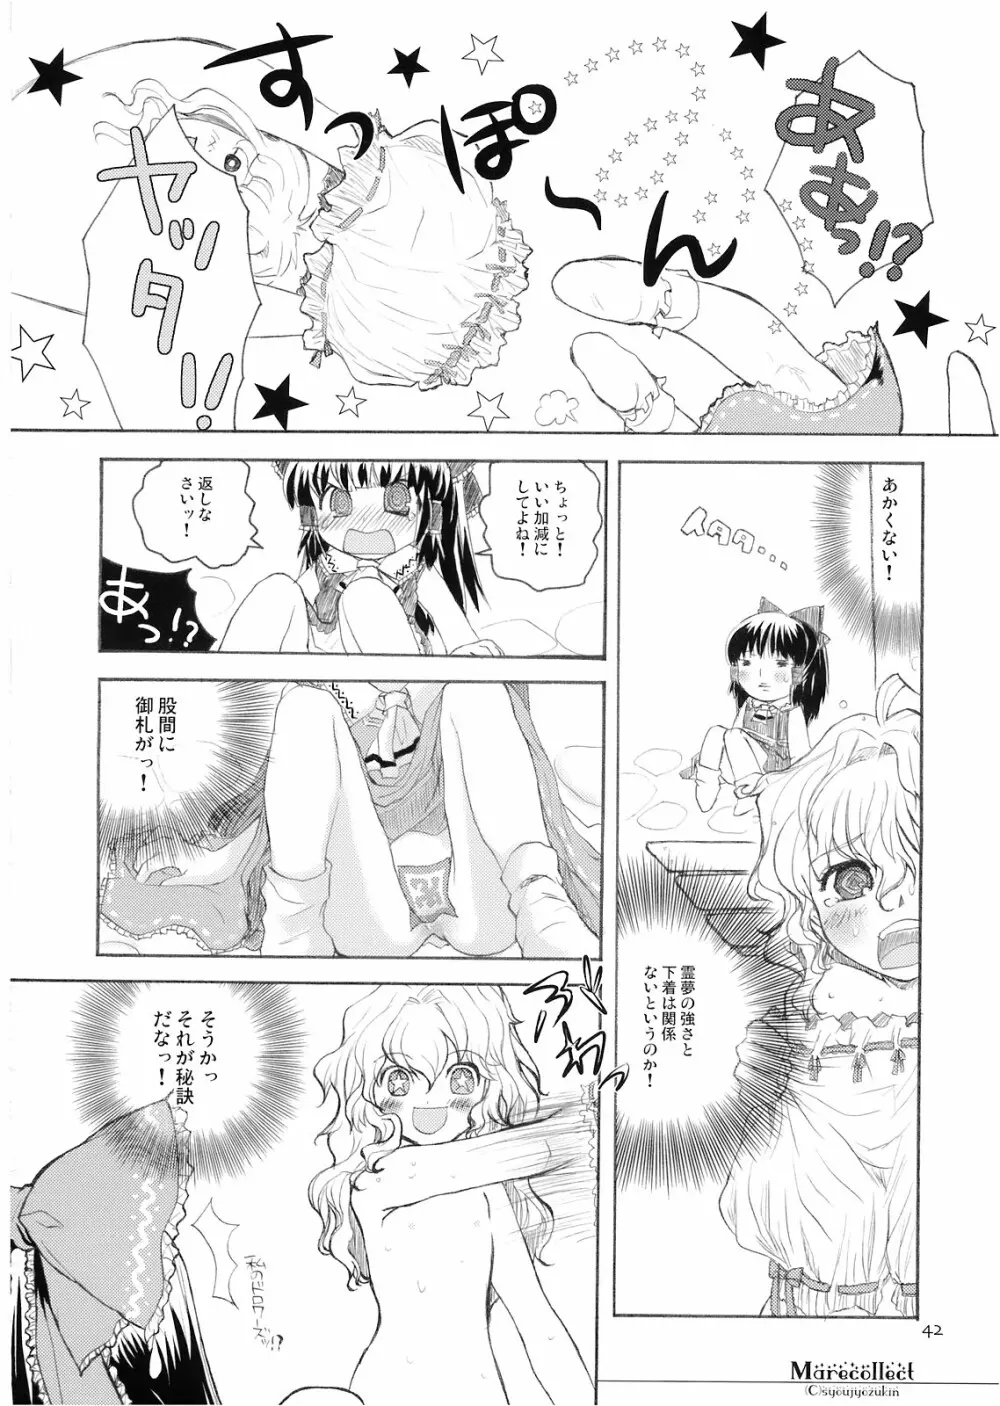 Marecollect Page.42